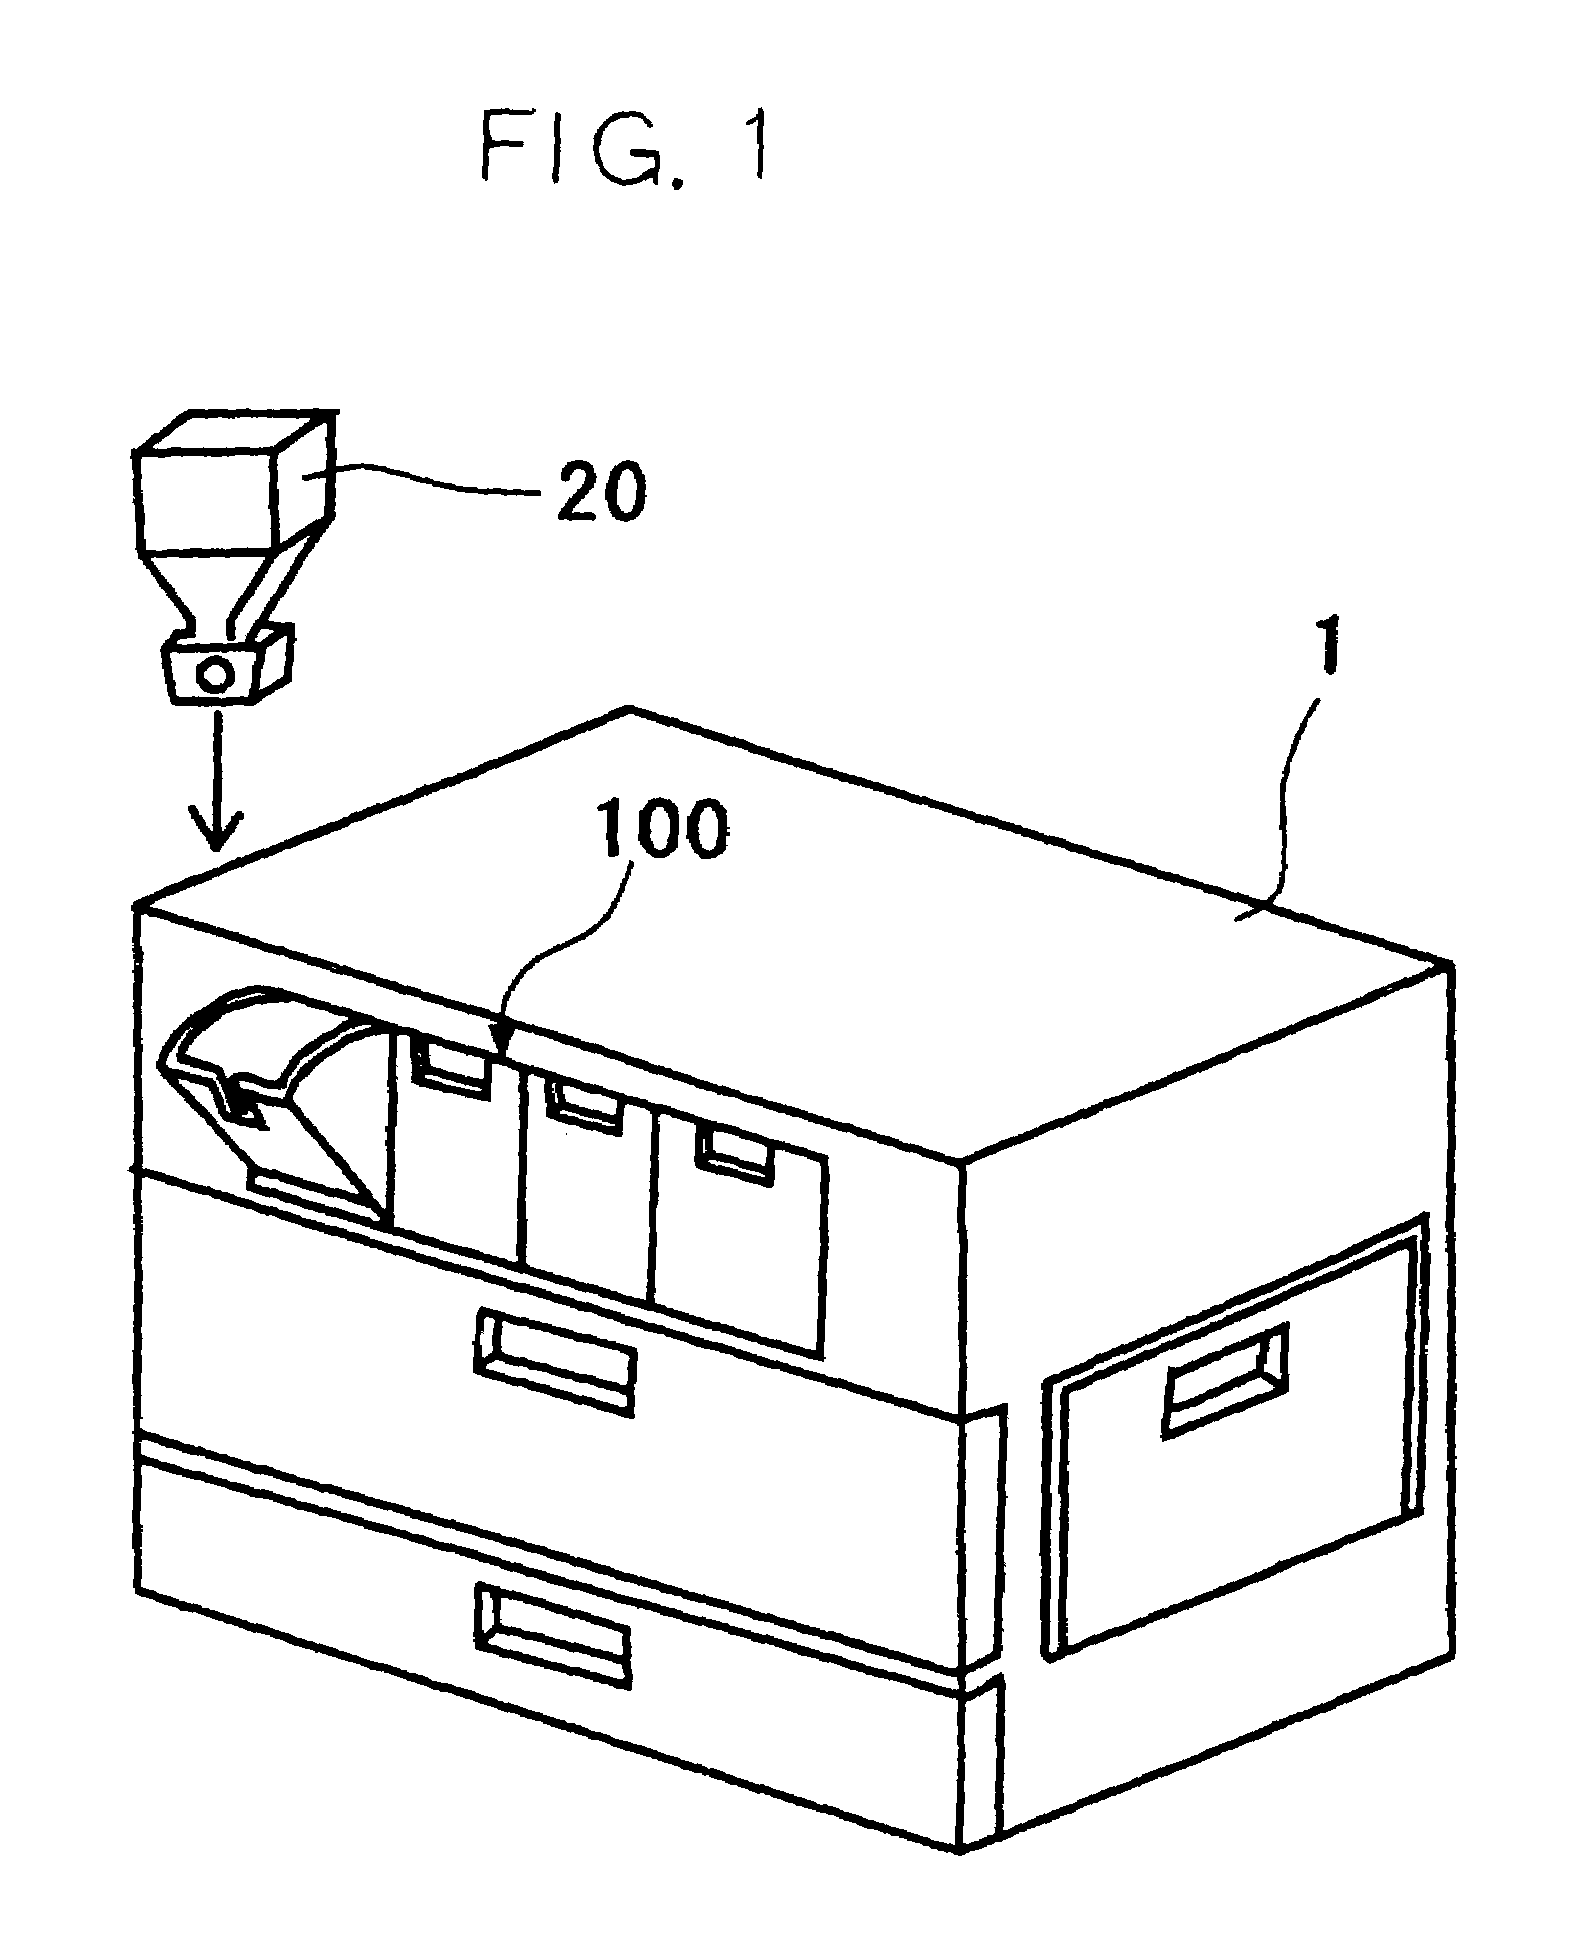 Toner replenishing device with timing control of toner replenishing device